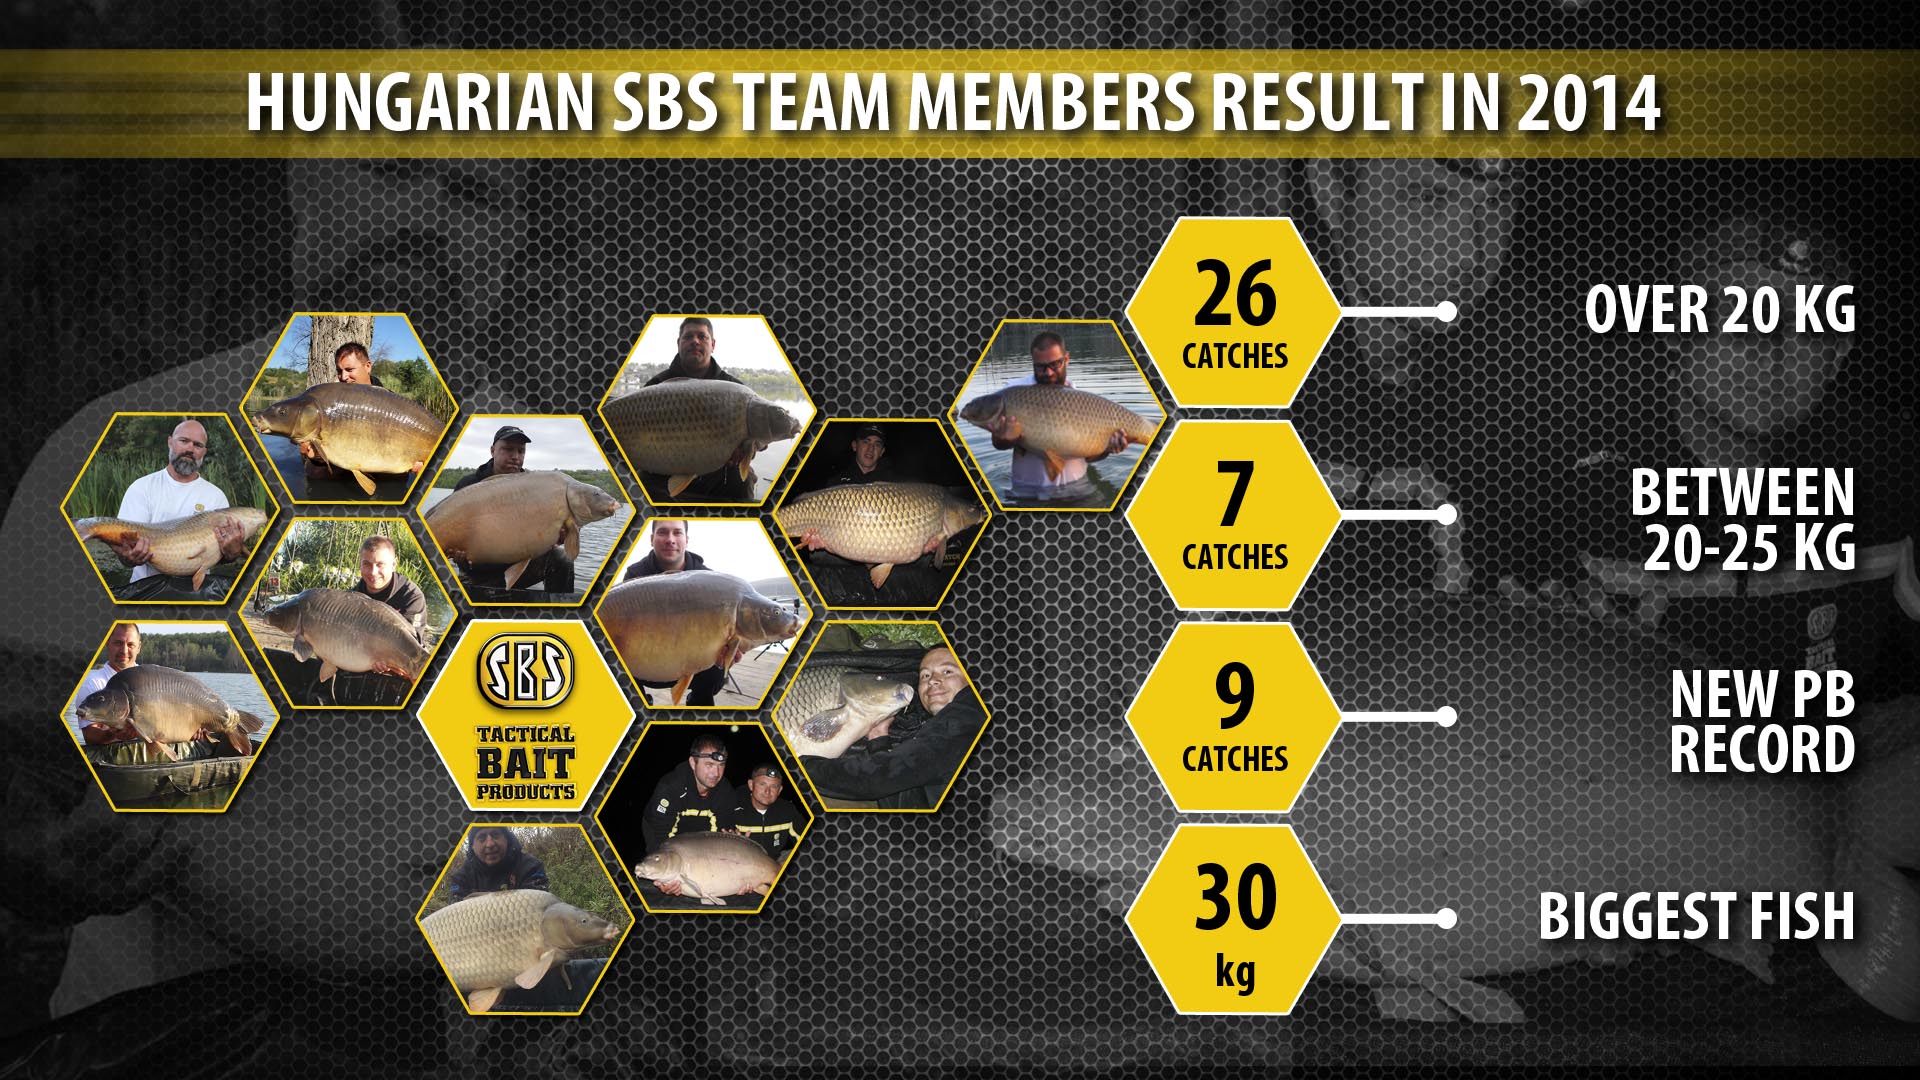 During the summary of the catch results we figured out that this is a new record in the history of the Team SBS!